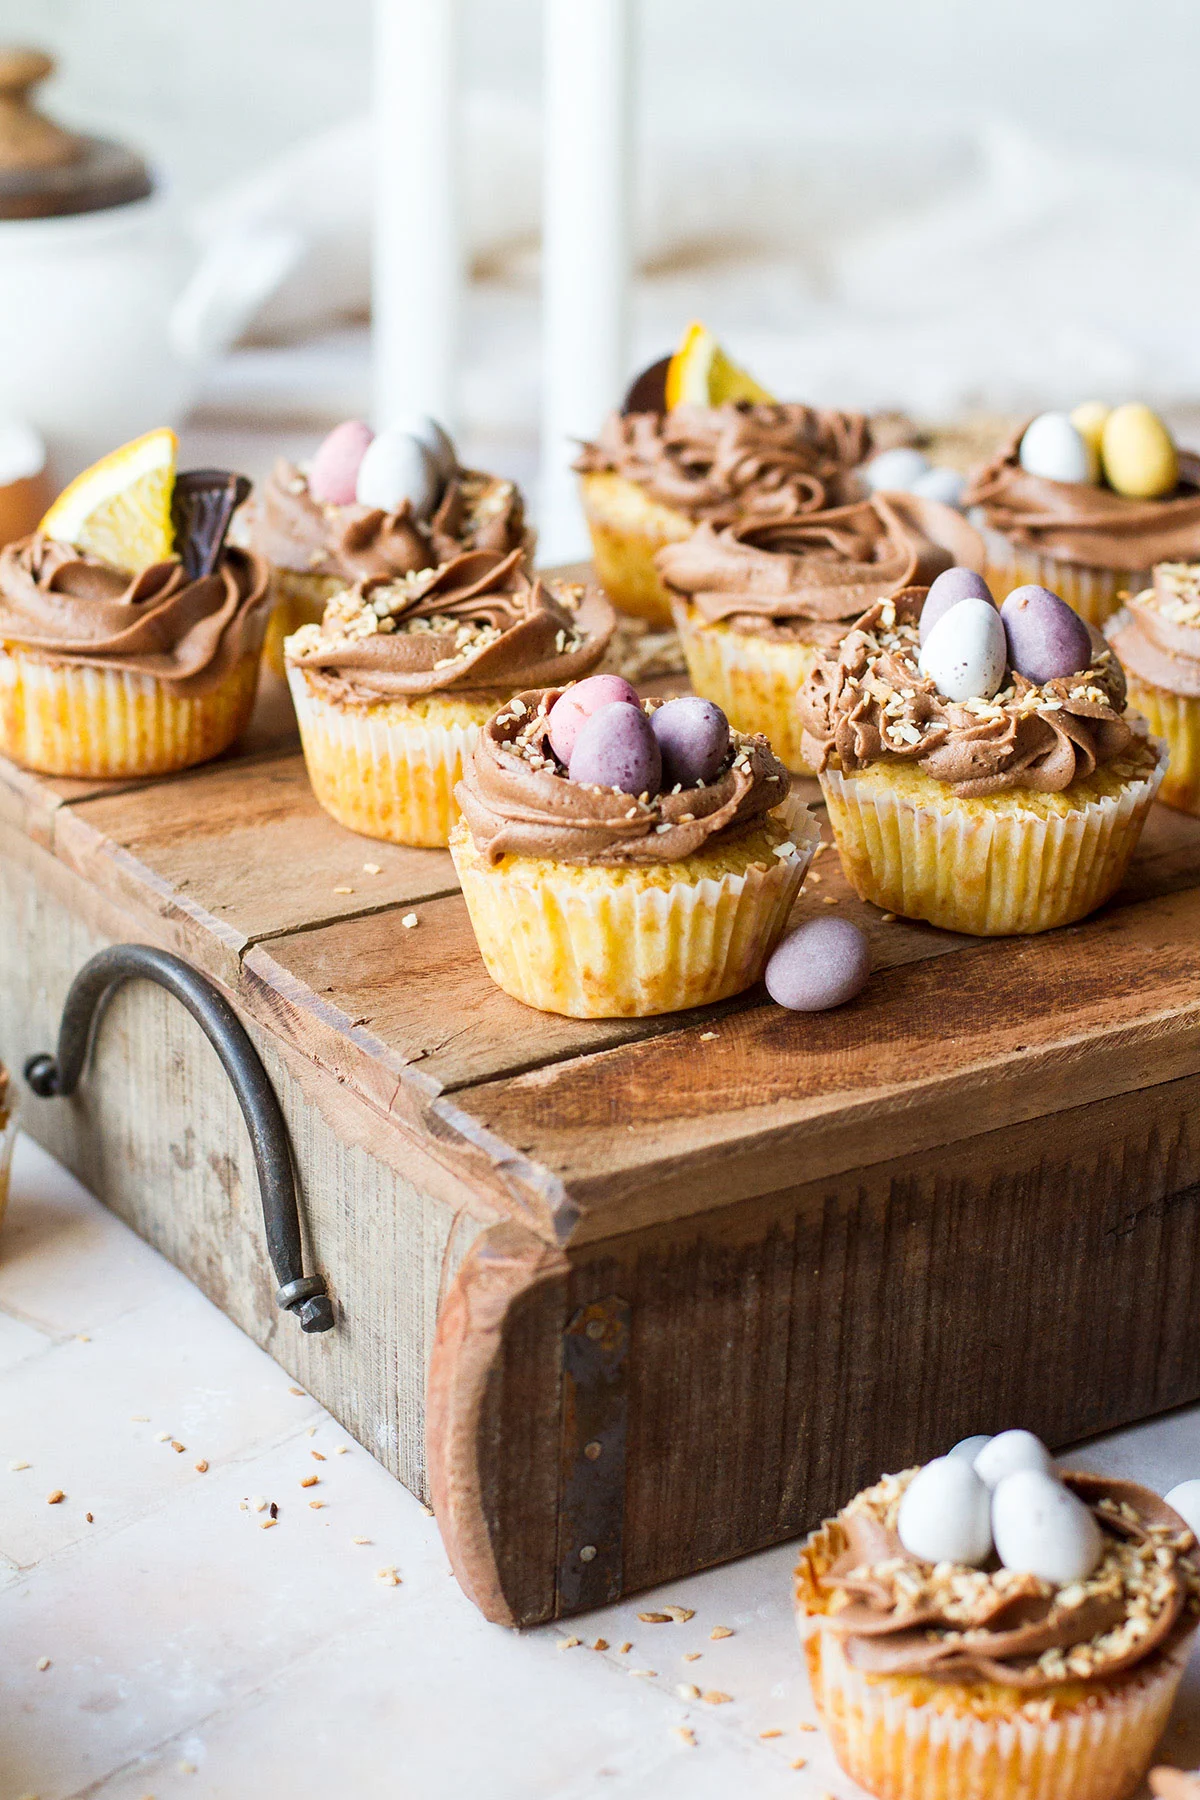 Cupcakes with Easter egg nest decorations on a wooden tray.